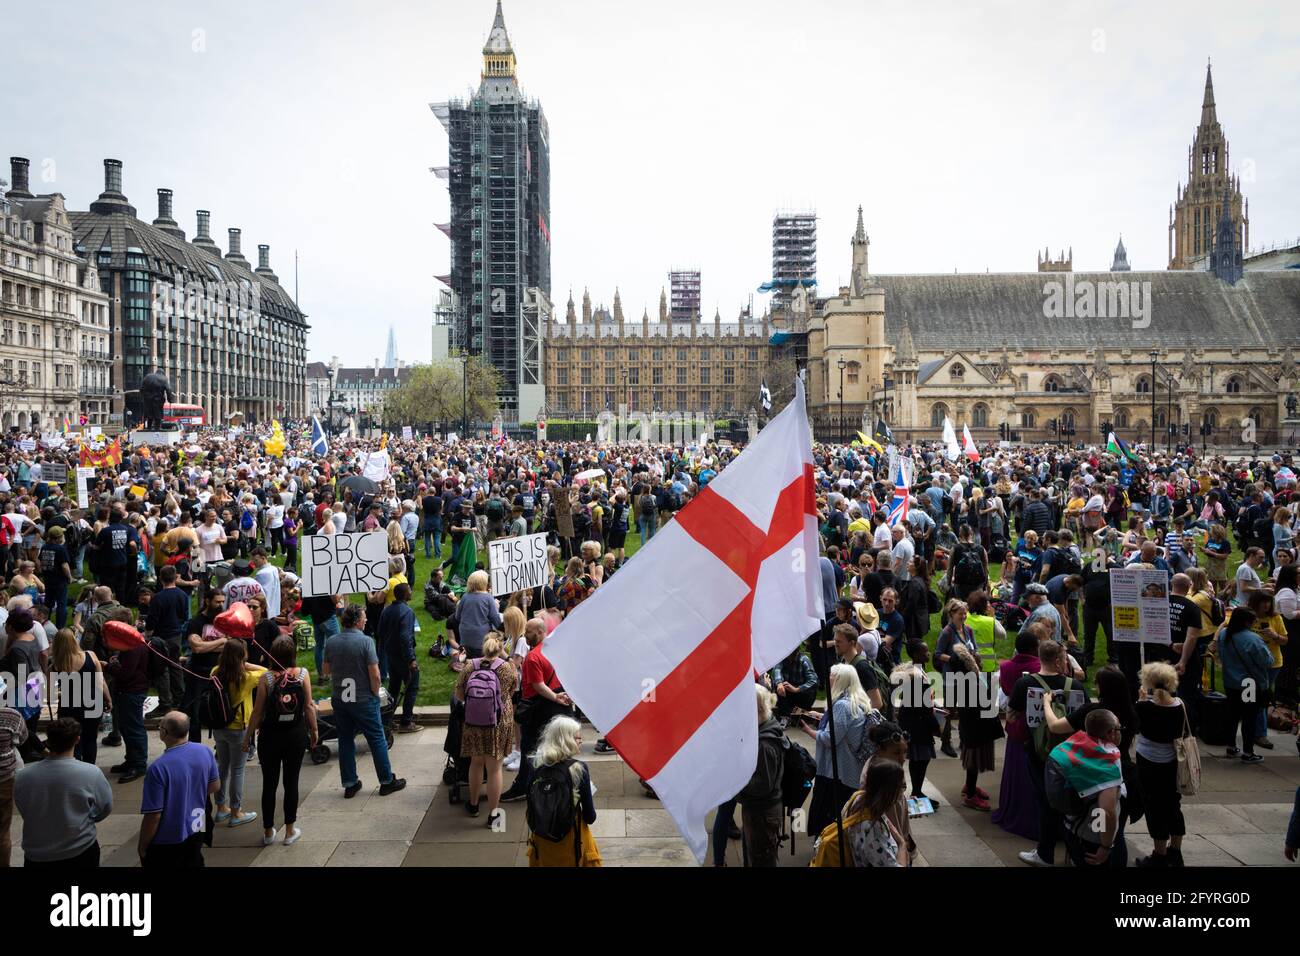 Manchester, UK. 29th May, 2021. Parliament Square fills up before a anti-lockdown protest. The number of people attending the protests has increased month on month since the introduction of the COVID-19 restrictions. Credit: Andy Barton/Alamy Live News Stock Photo